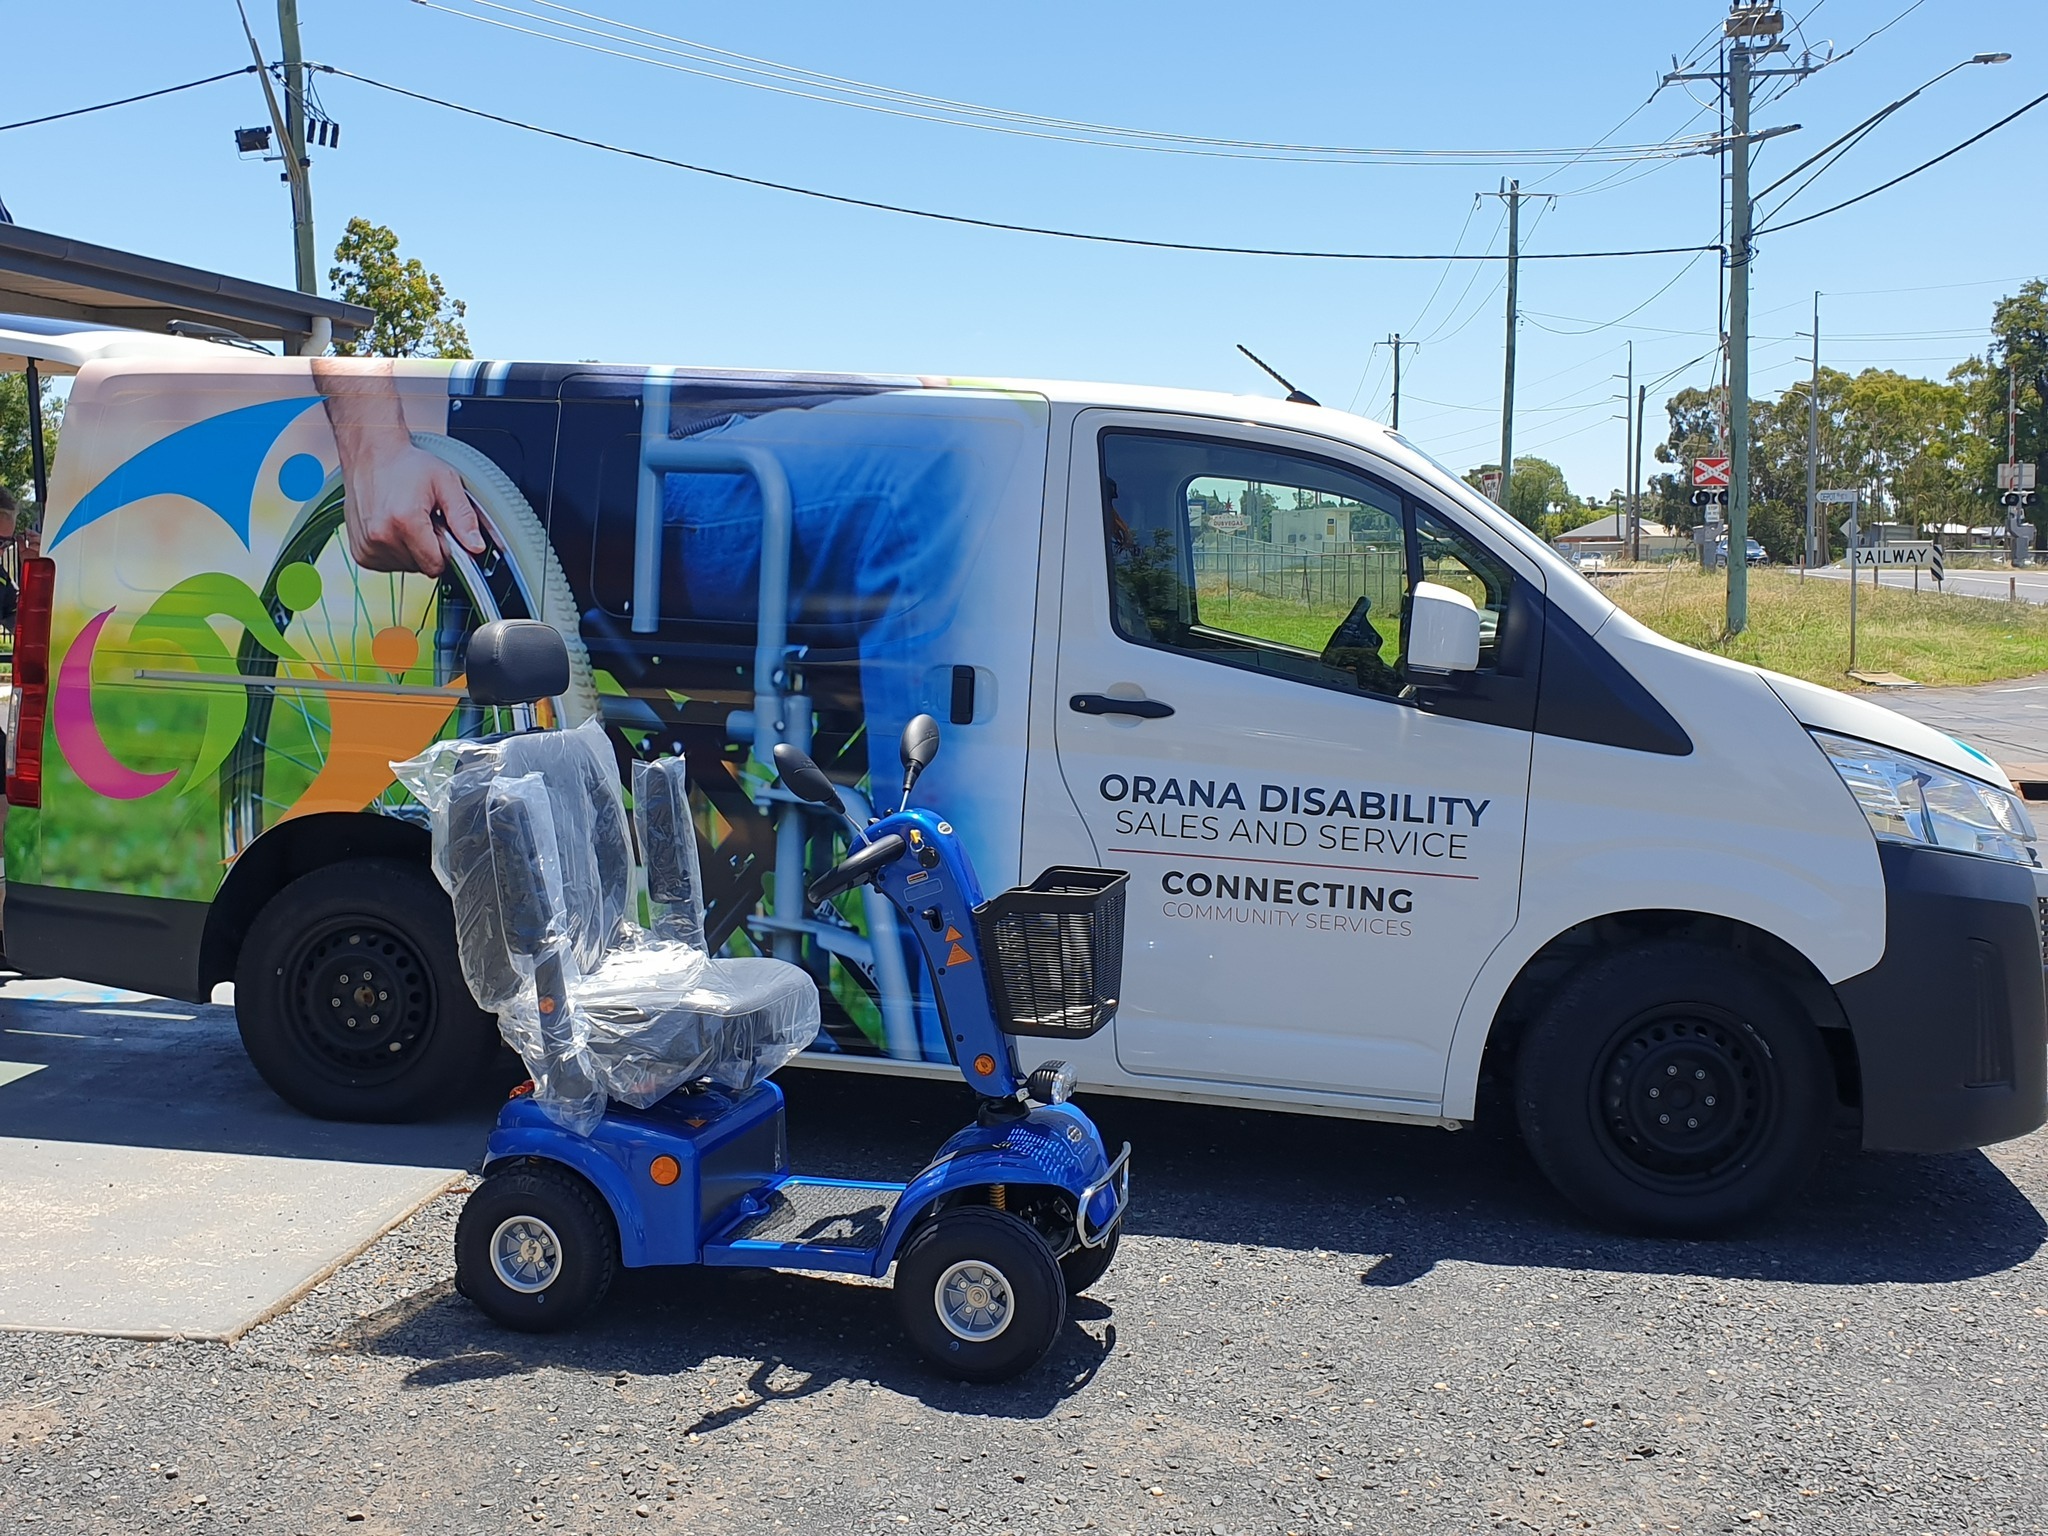 Orana Disability Sales and Service acquired by Dubbo Neighbourhood Centre Ltd